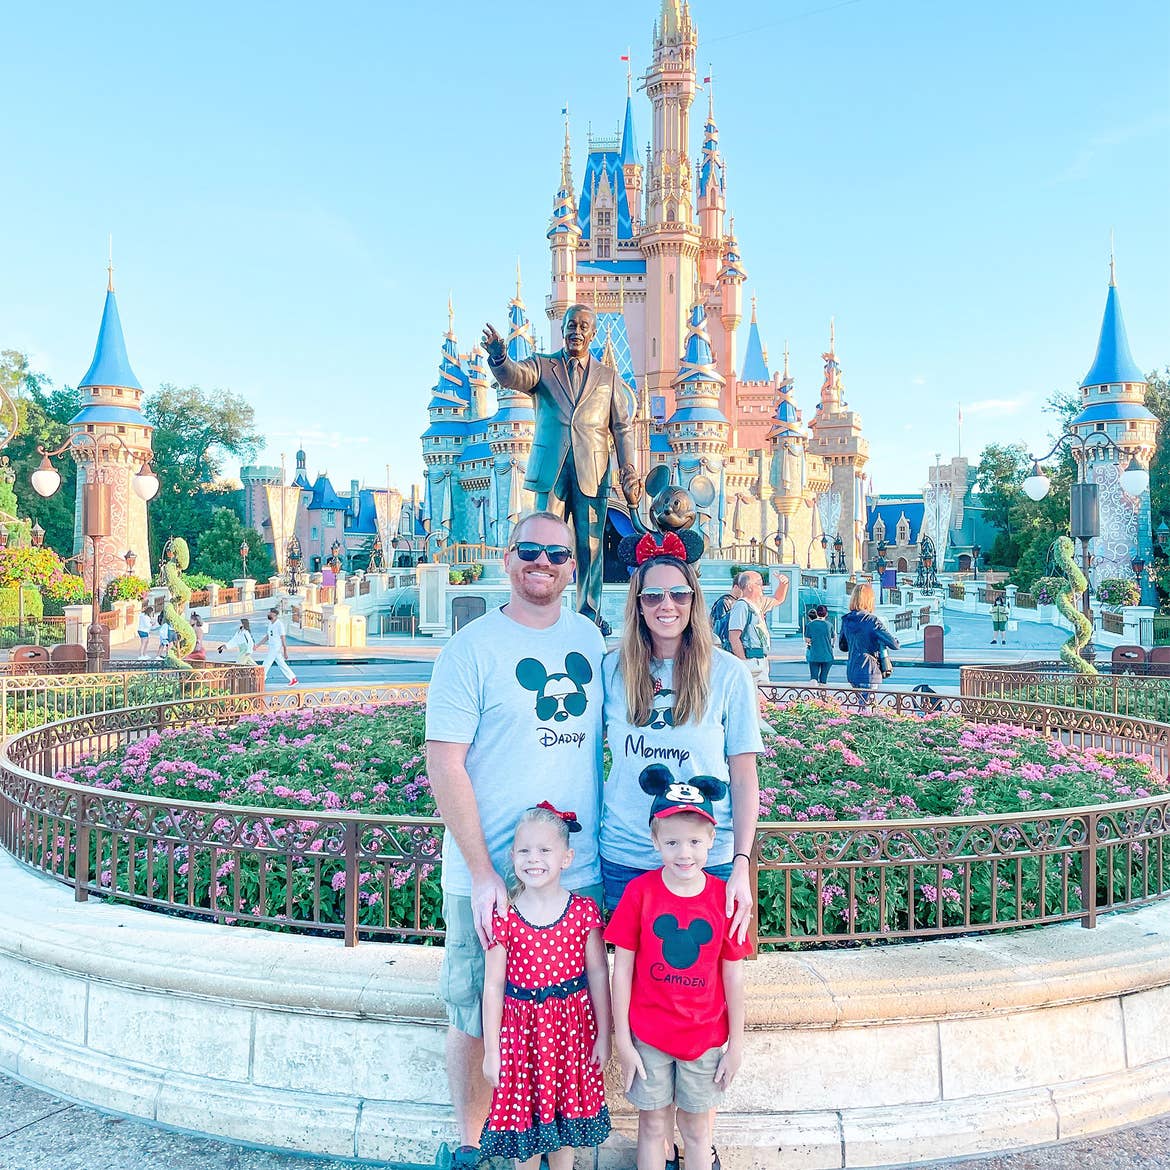 A man, woman, boy and girl stand wearing Disney apparel in front of Cinderella's Castle in Walt Disney World.